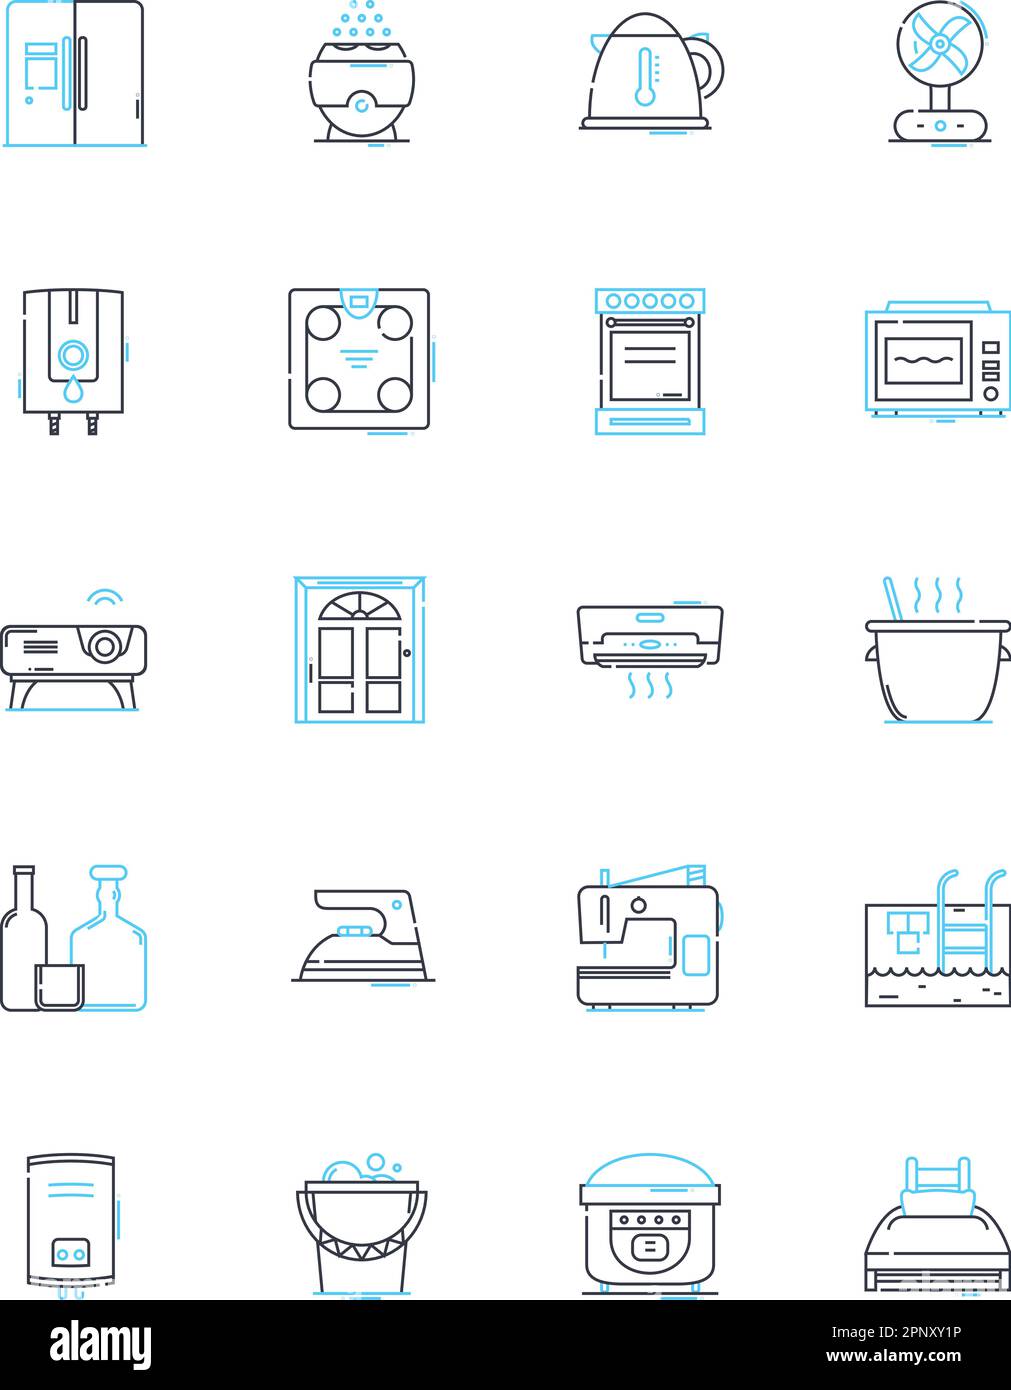 Appliances linear icons set. Refrigerator, Stove, Freezer, Microwave, Dishwasher, Blender, Toaster line vector and concept signs. Oven,Coffee maker Stock Vector